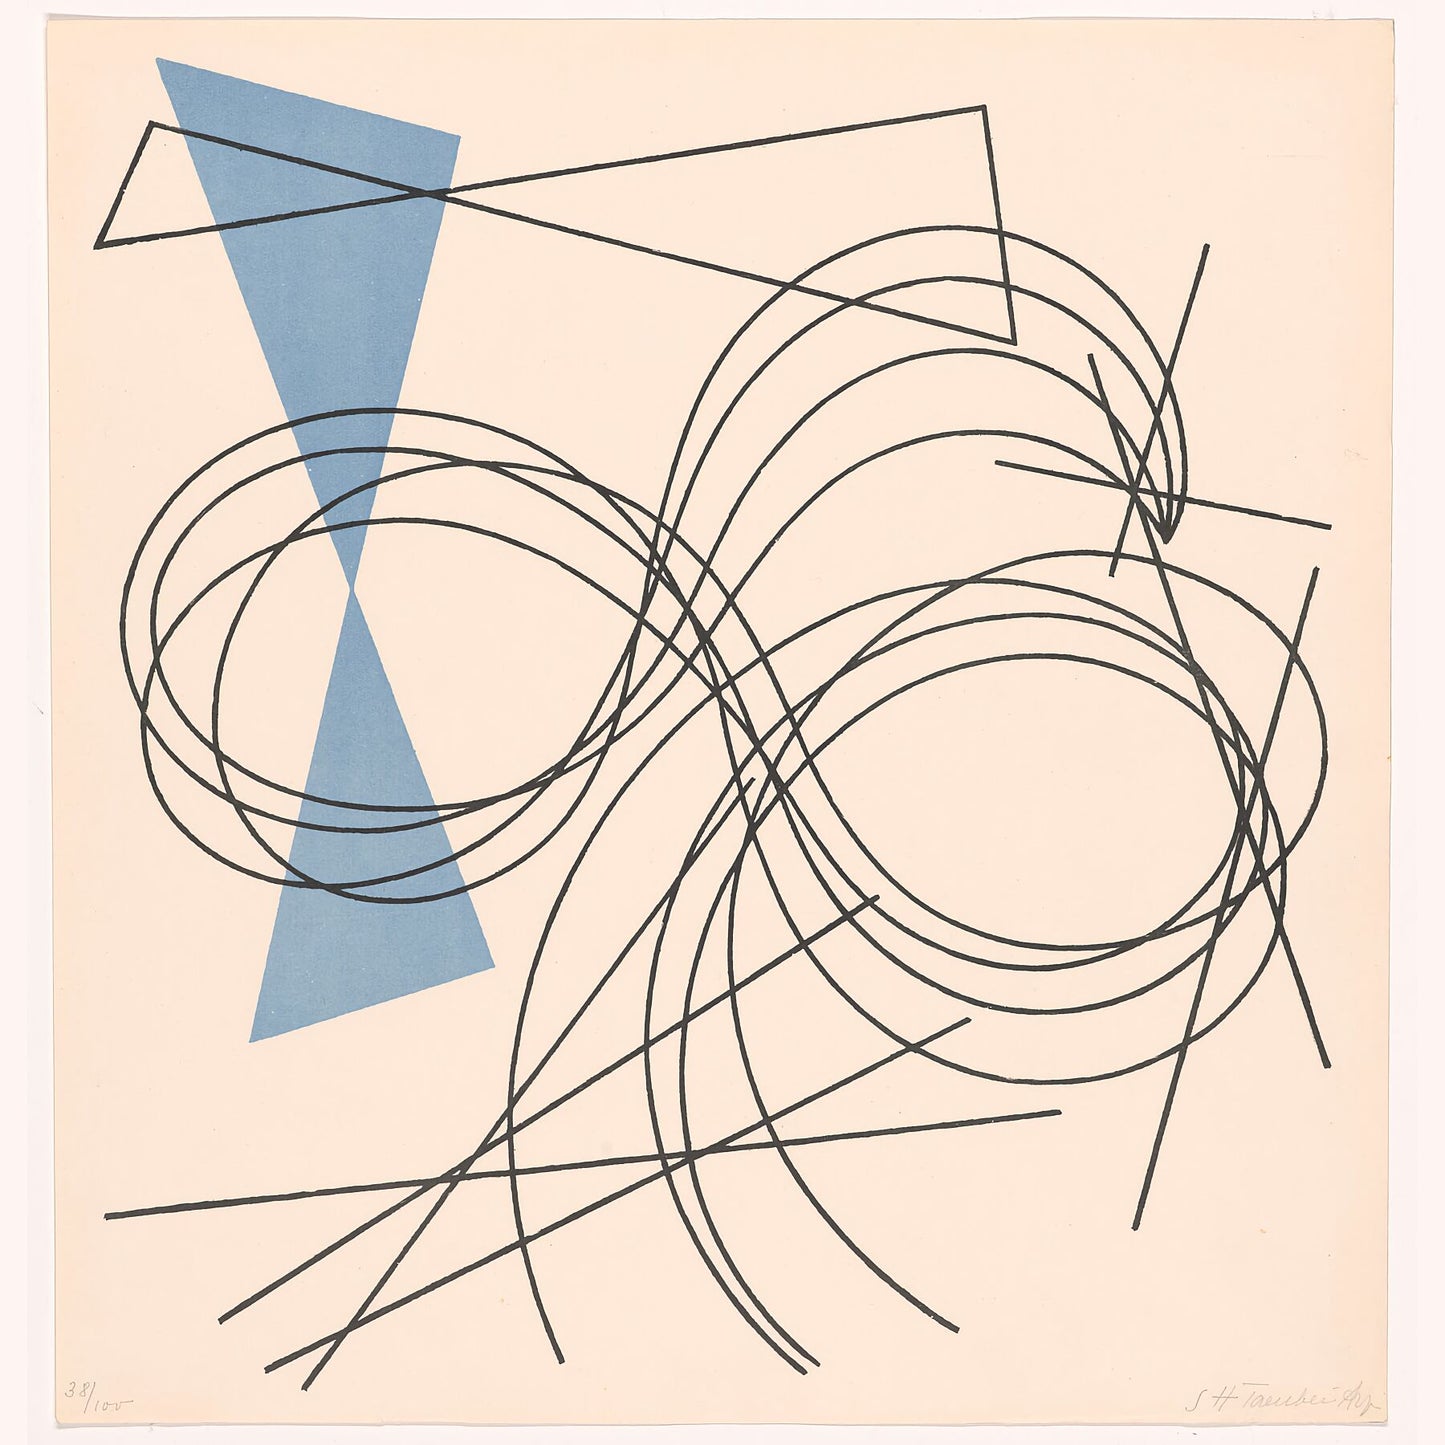 Plate (folio 15) from 5 Constructionen + 5 Compositionen by Sophie Taeuber-Arp - 1941